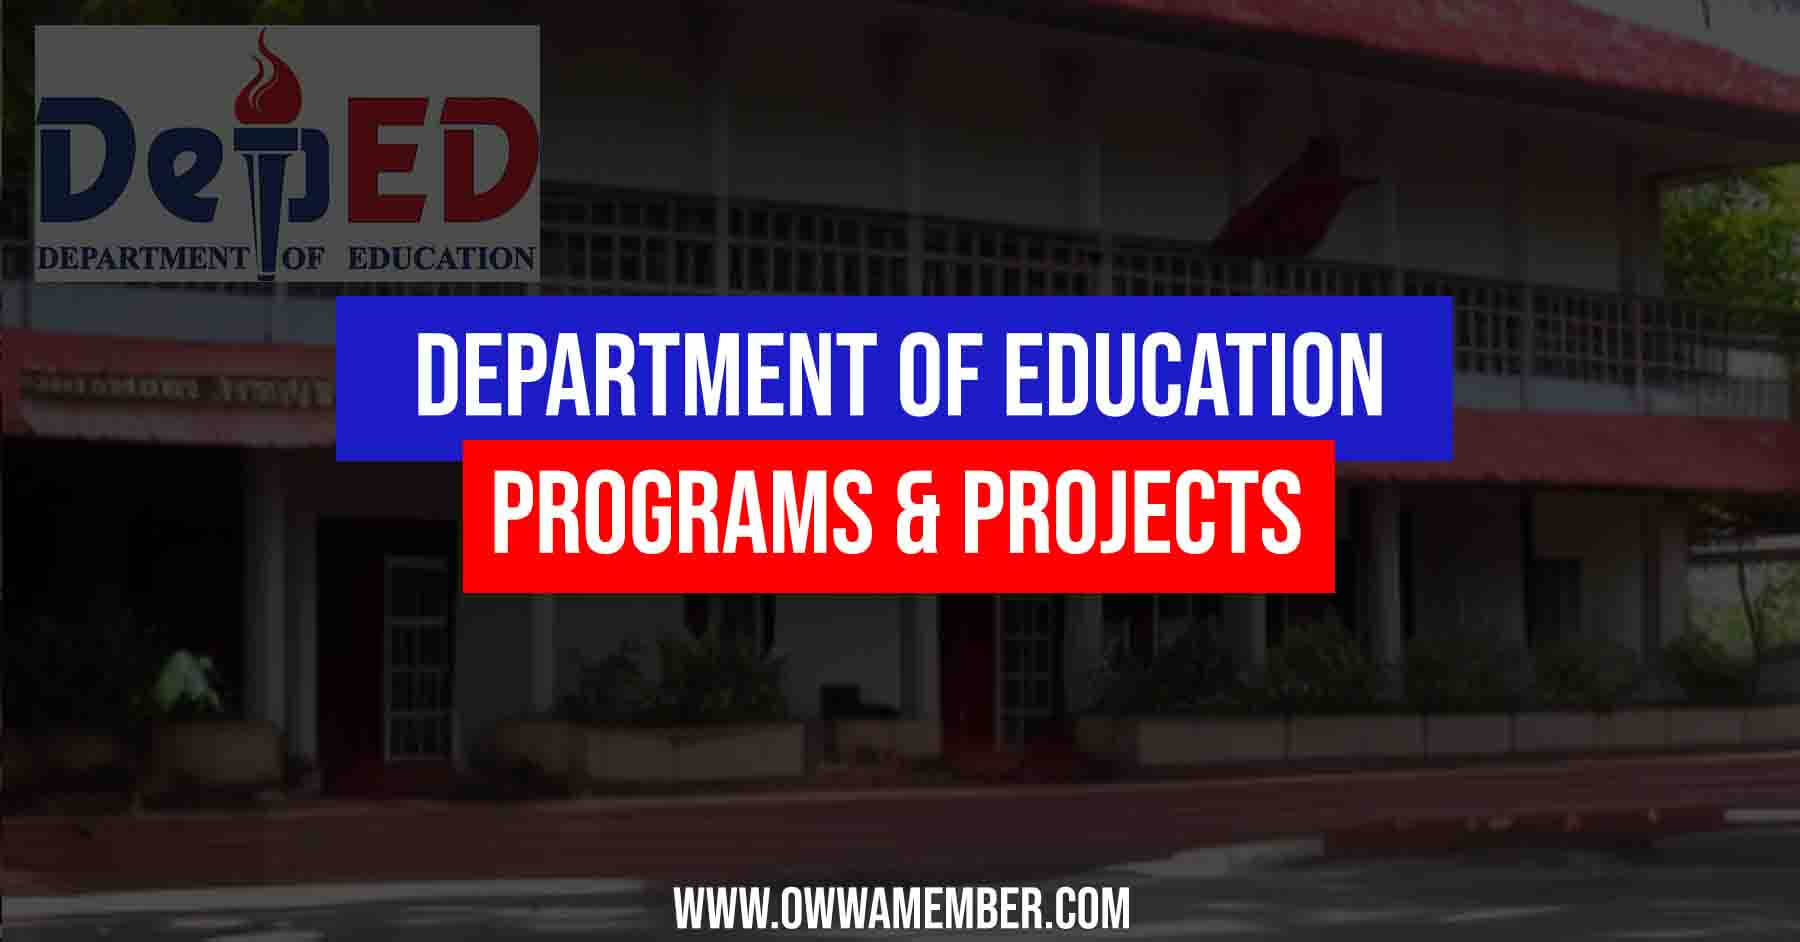 deped department of education programs and projects